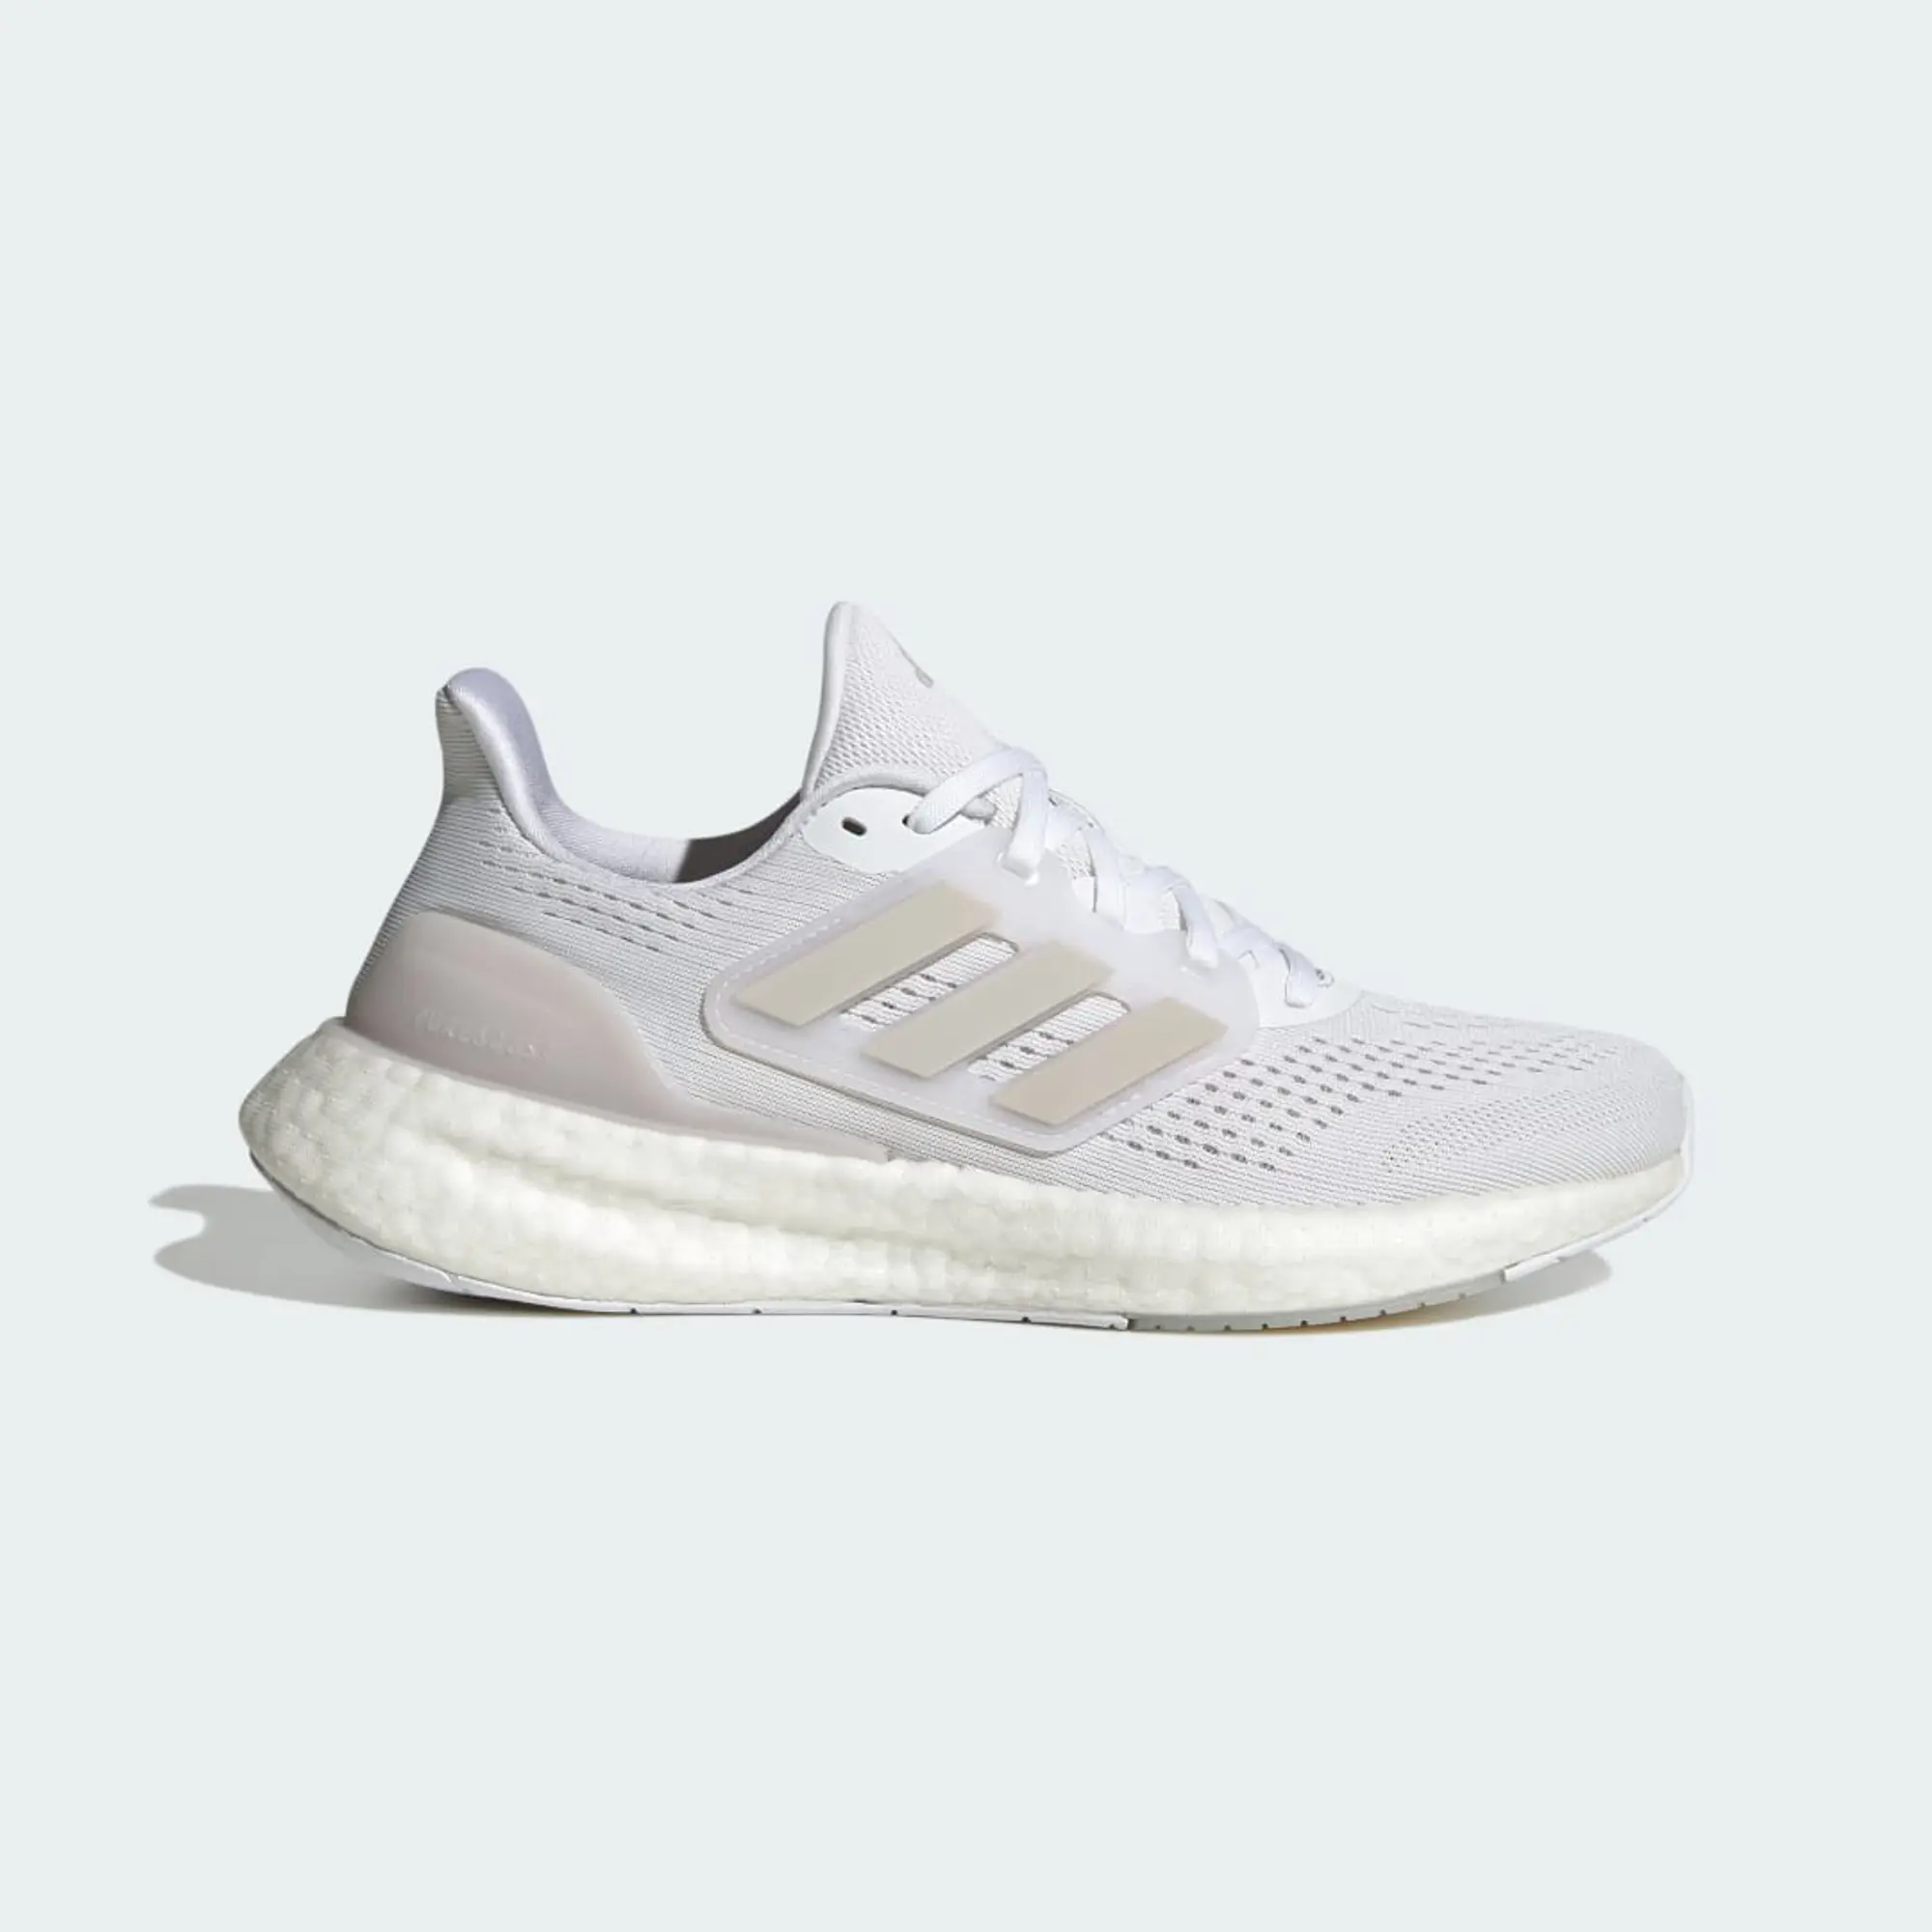 adidas Pureboost 23 Shoes - Cloud White/Grey Two/Core Black - UK 8